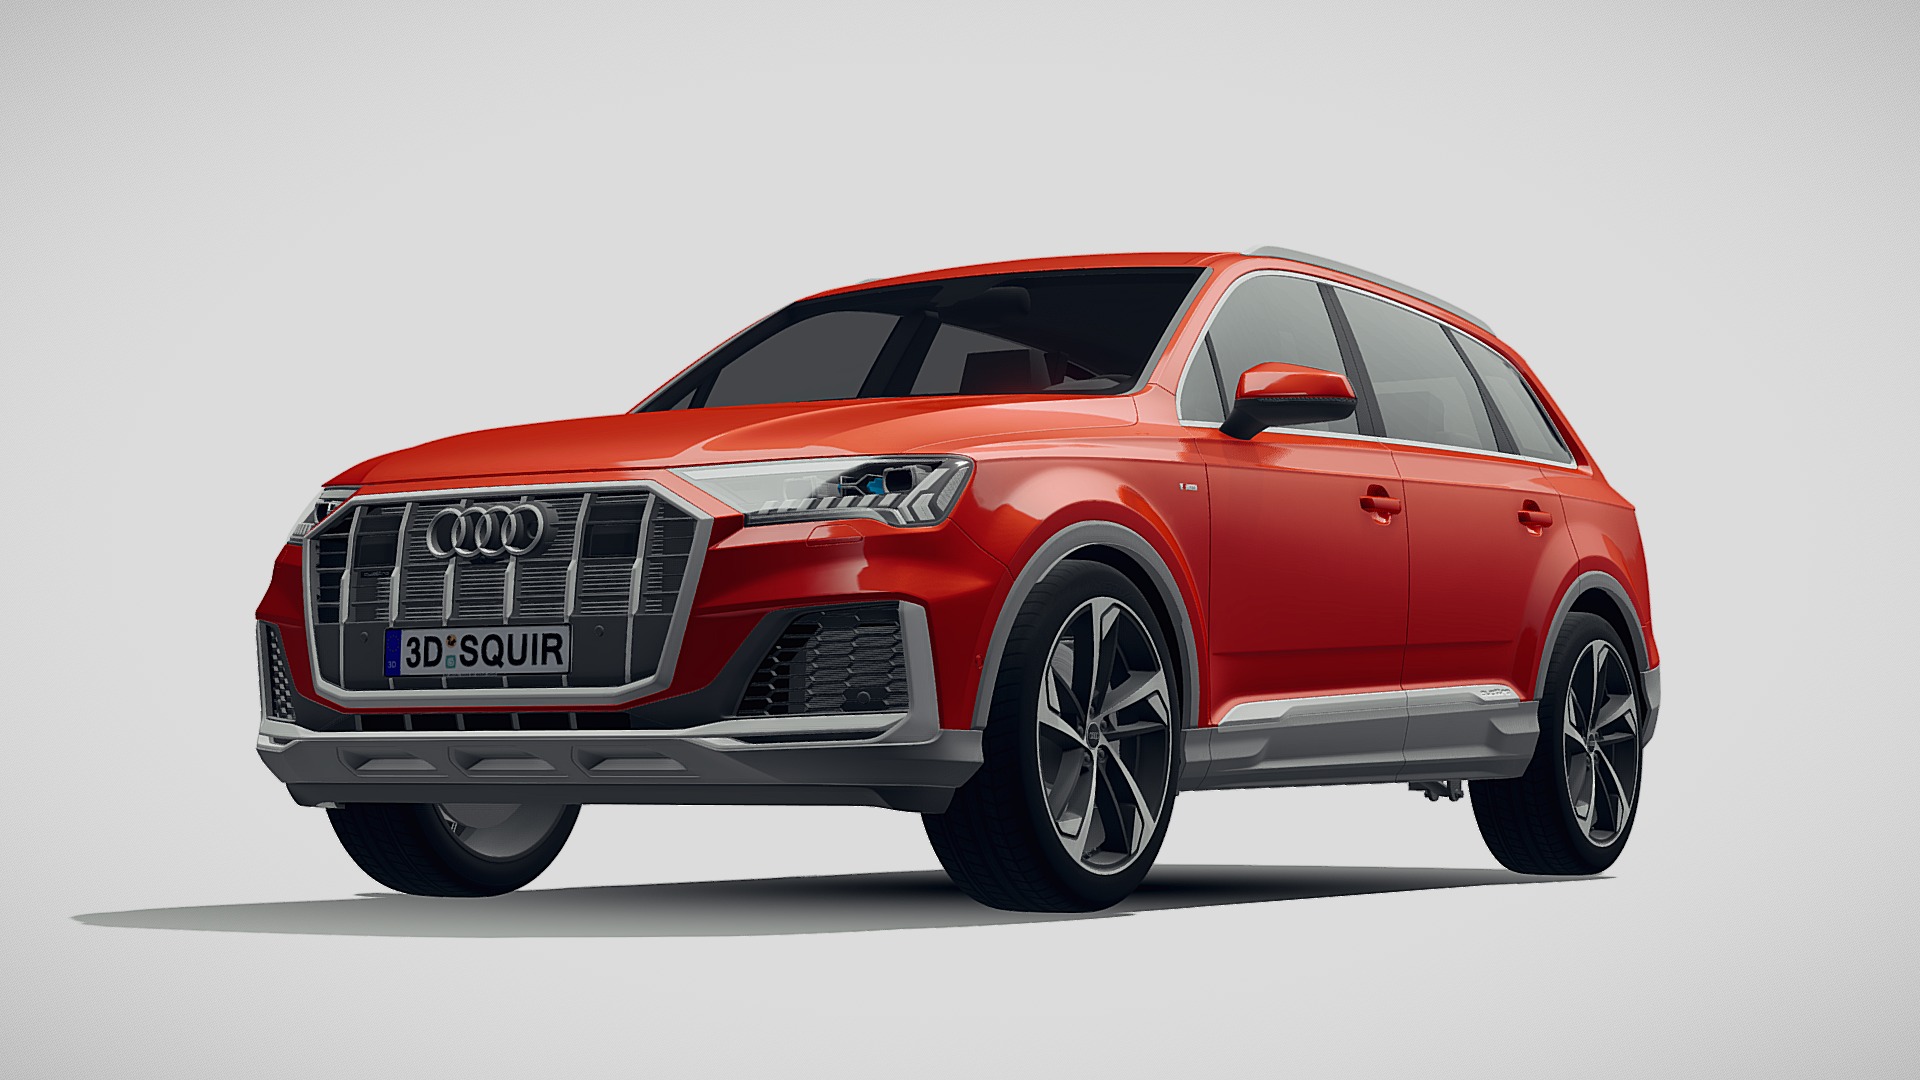 3D model Audi Q7 2020 - This is a 3D model of the Audi Q7 2020. The 3D model is about a red car with black wheels.